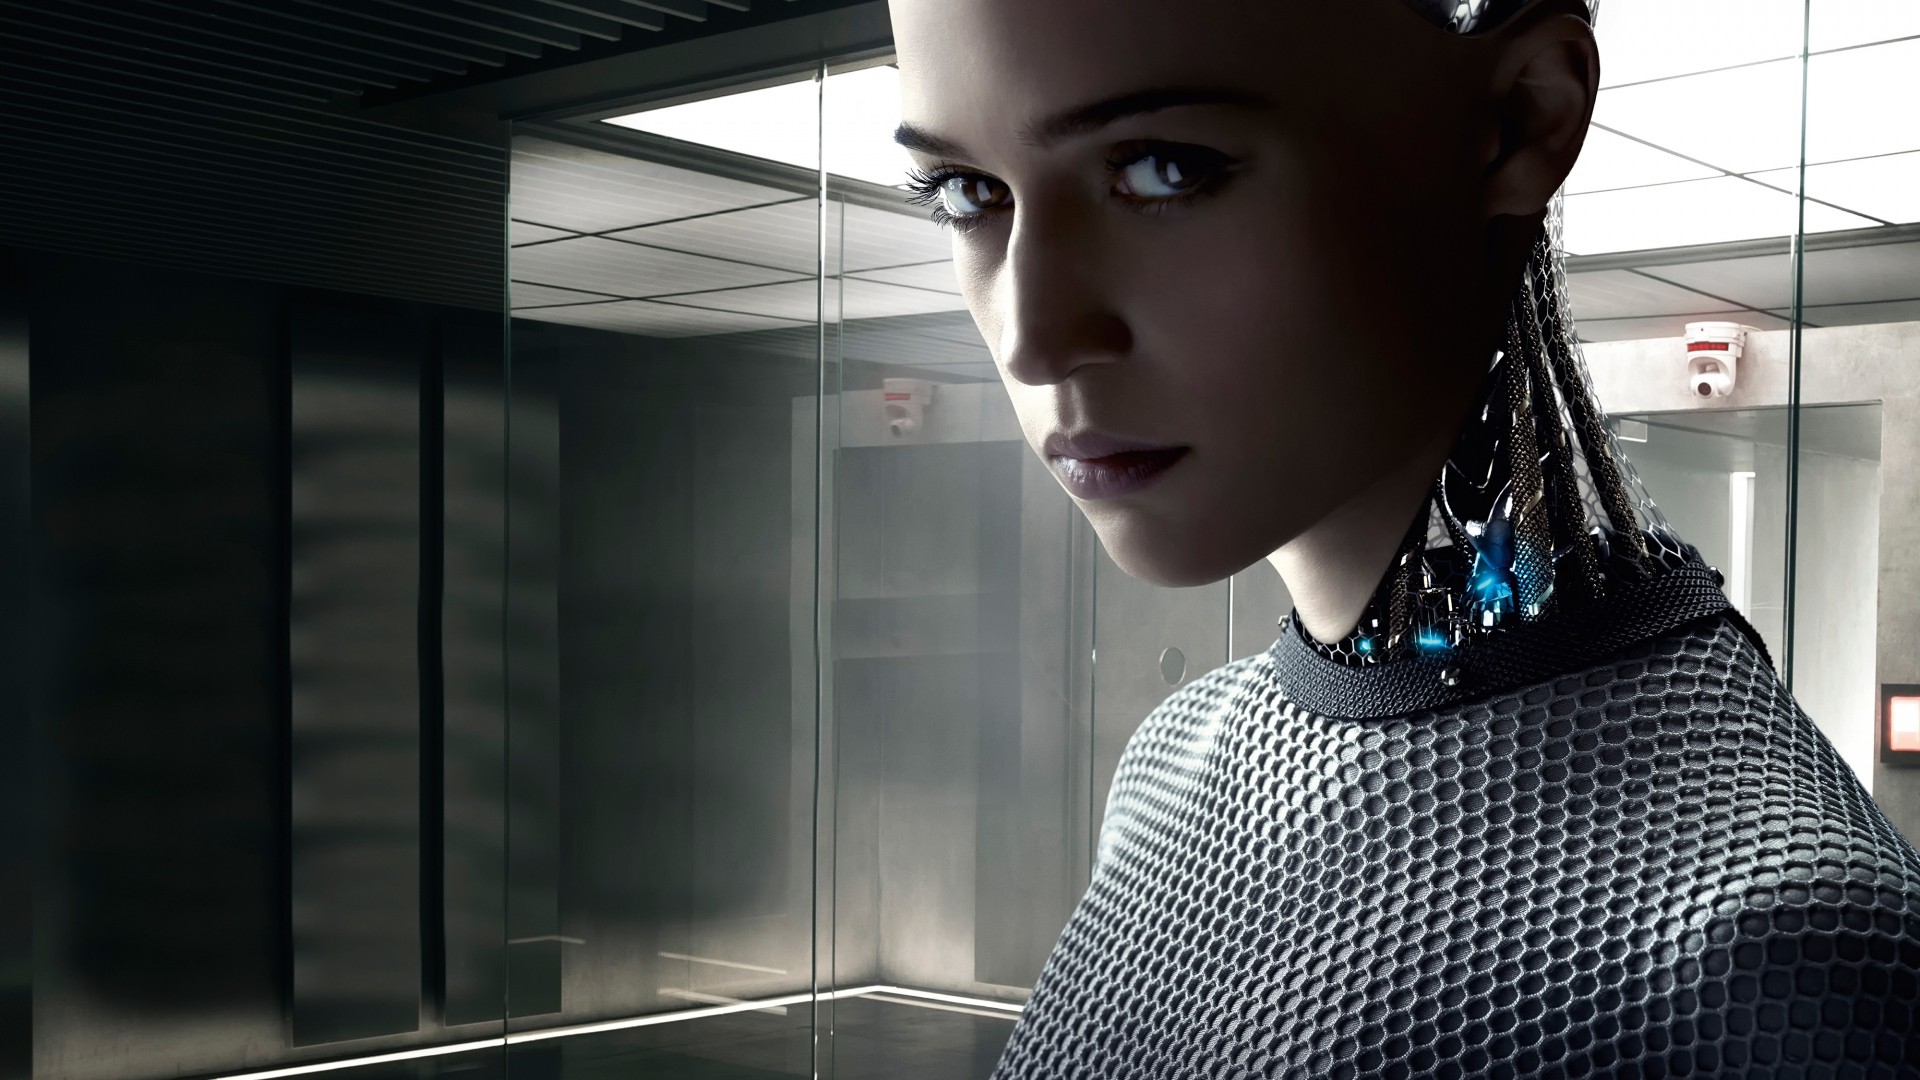 Androids Women Alicia Vikander Actress Ex Machina Movies Science Fiction Artificial Intelligence Dig 1920x1080